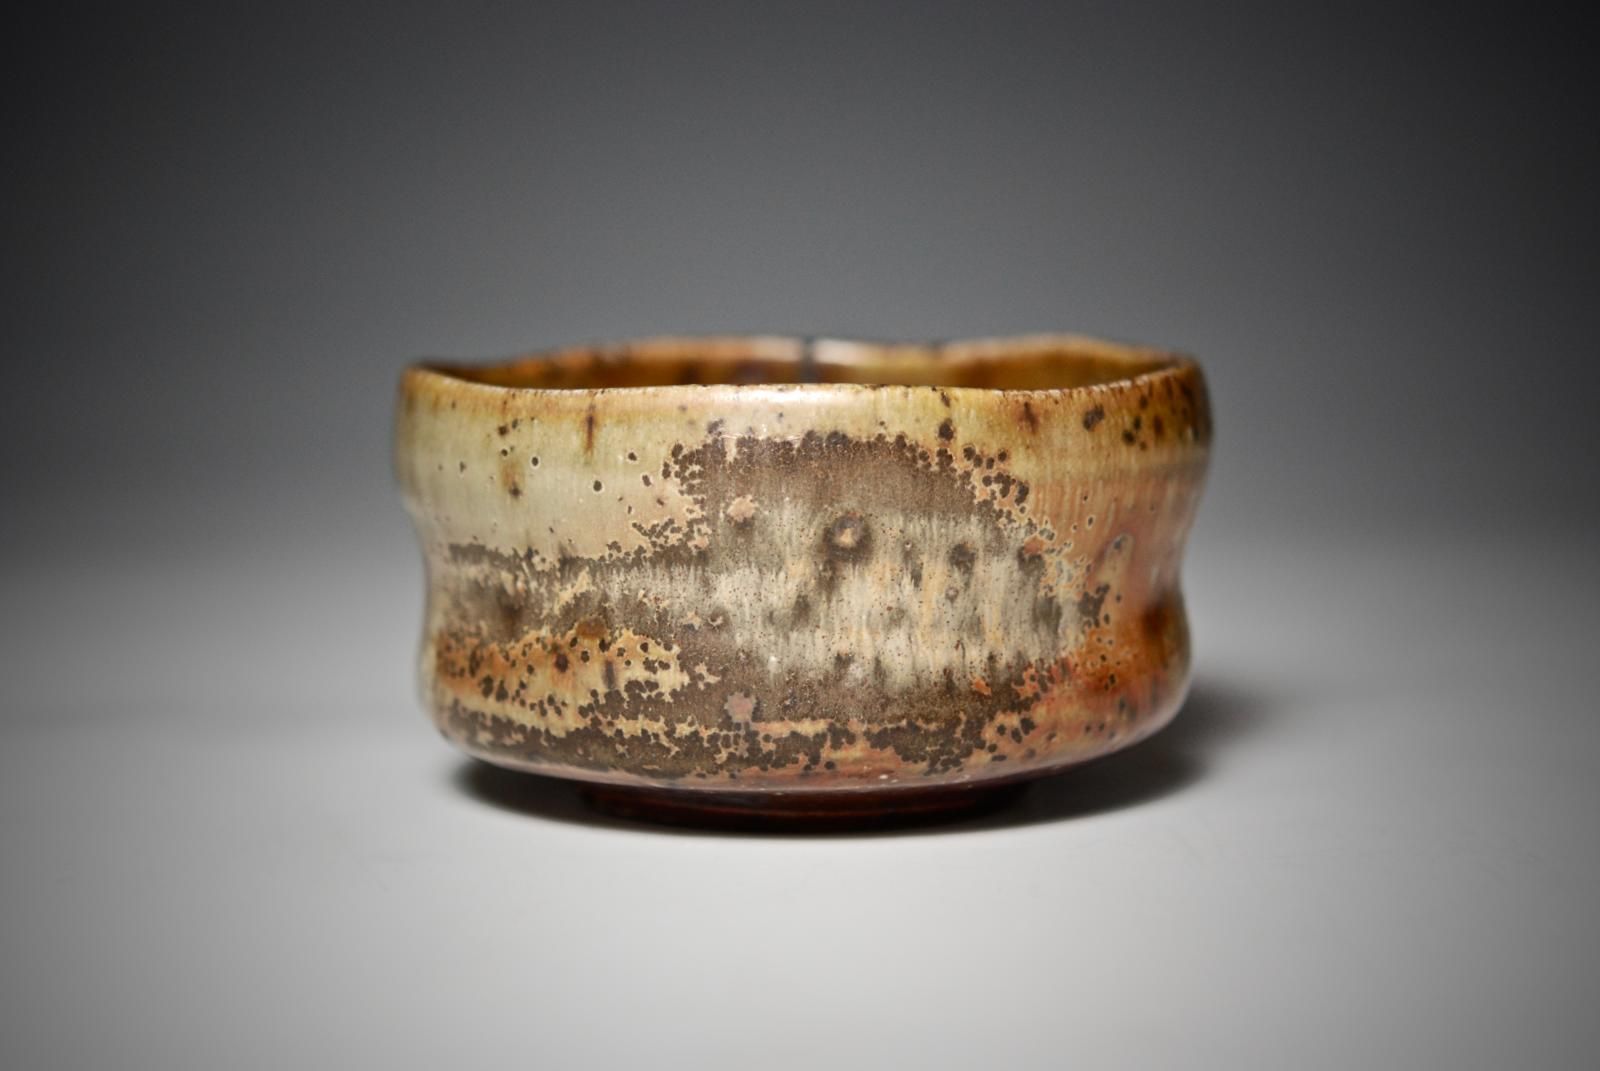 Thrown stoneware Chawan. Glazed outside and inside. Woodfired and salt glazed, fired for 2 days in a Burry style firebox cross-draft kiln with Australian Eucalyptus. by Sandy Lockwood